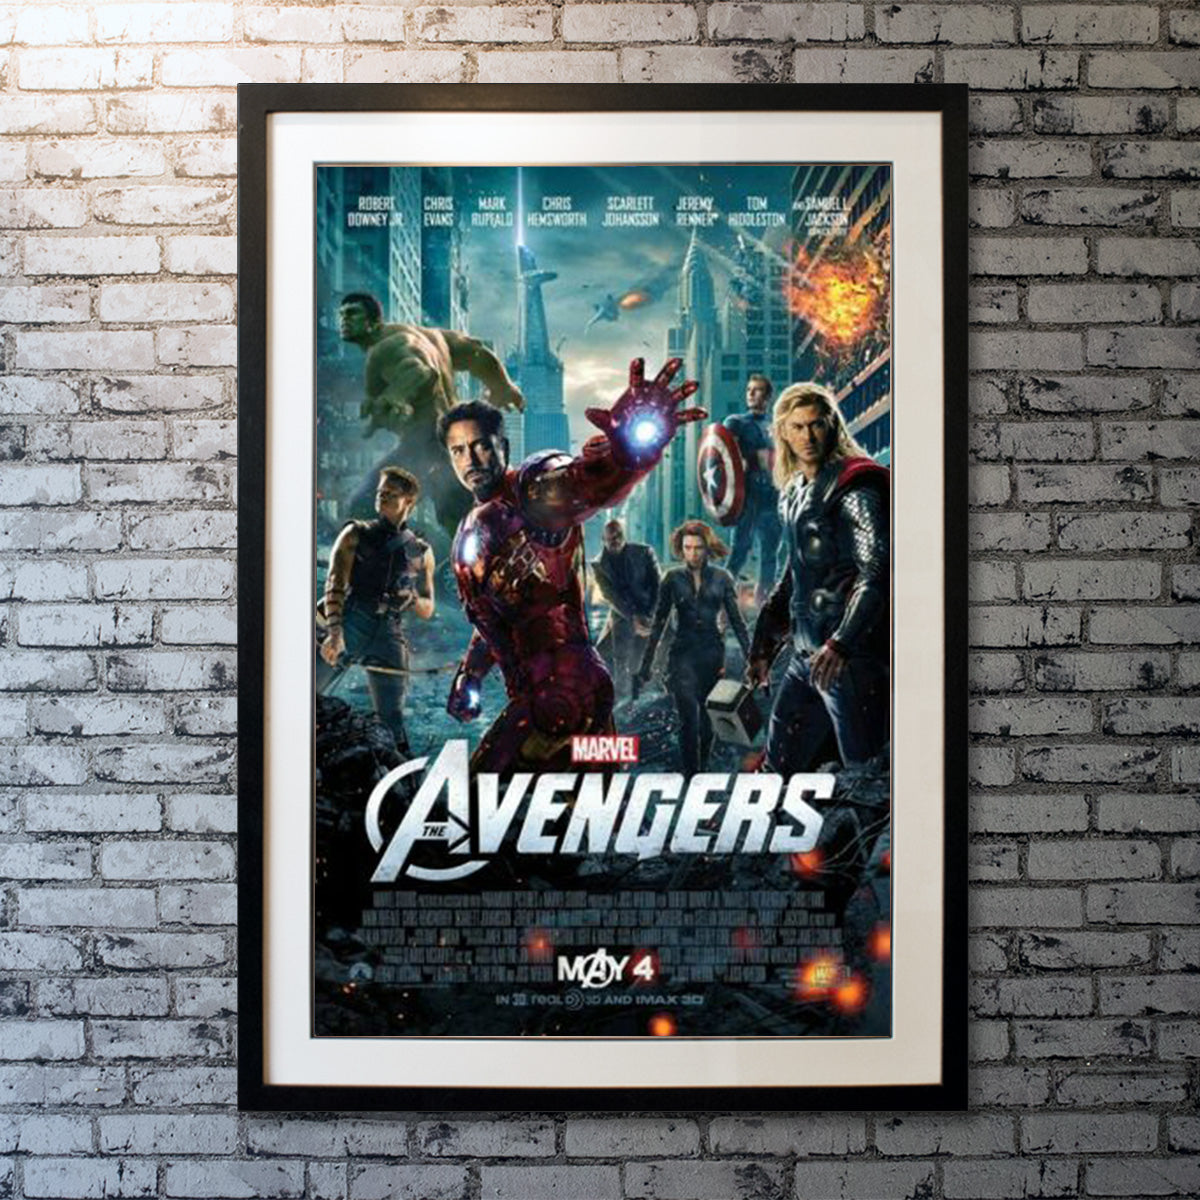 Original Movie Poster of Avengers, The (2012)